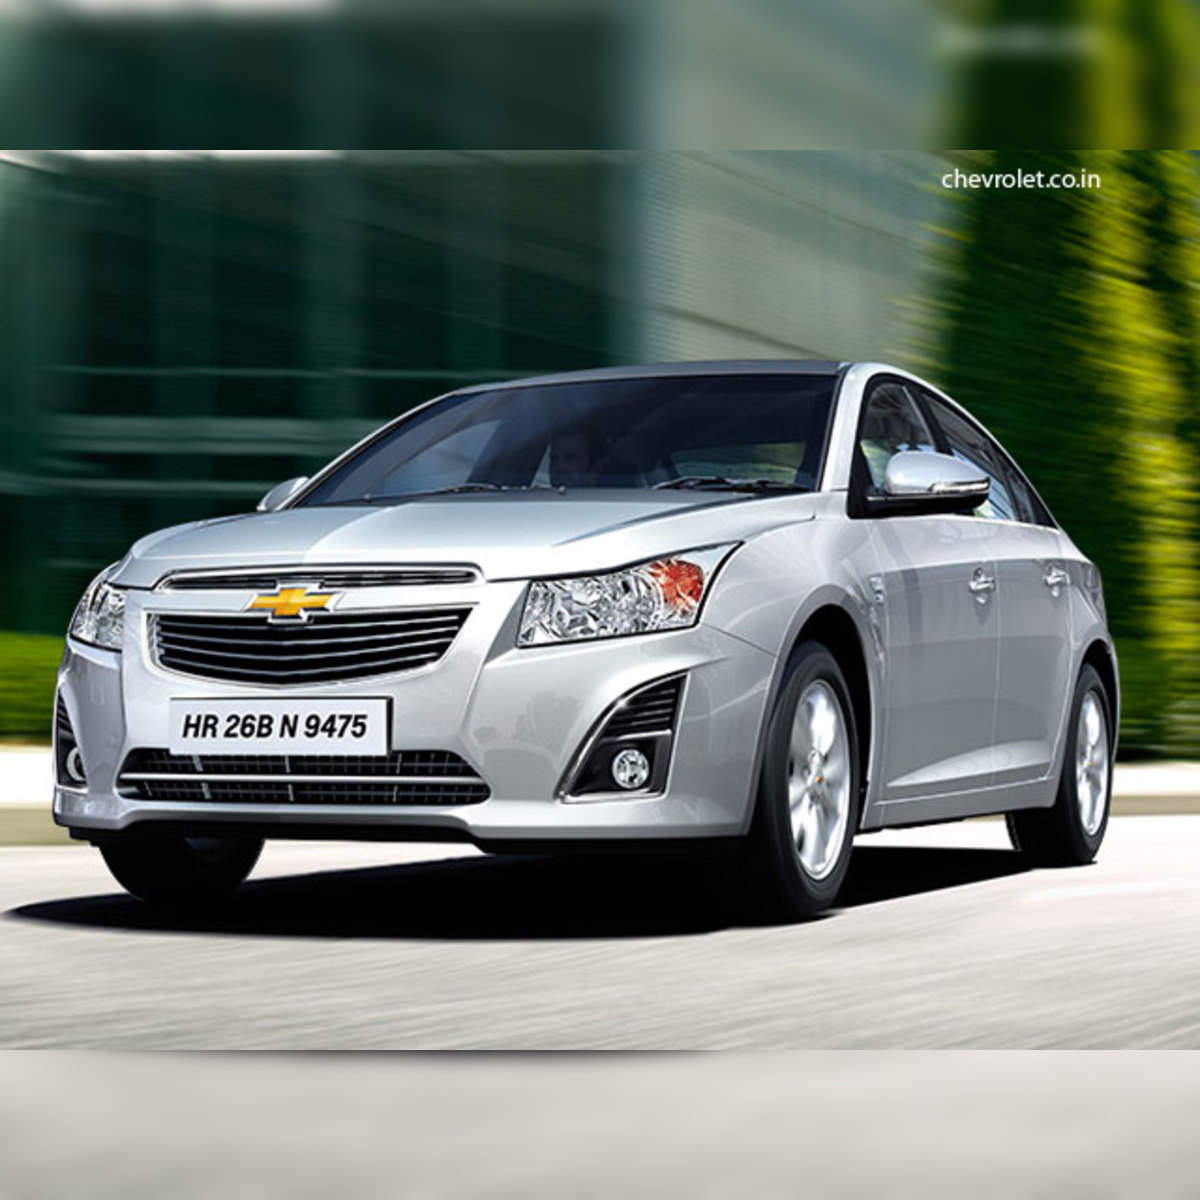 General Motors India launches new Chevrolet Cruze, price up to Rs